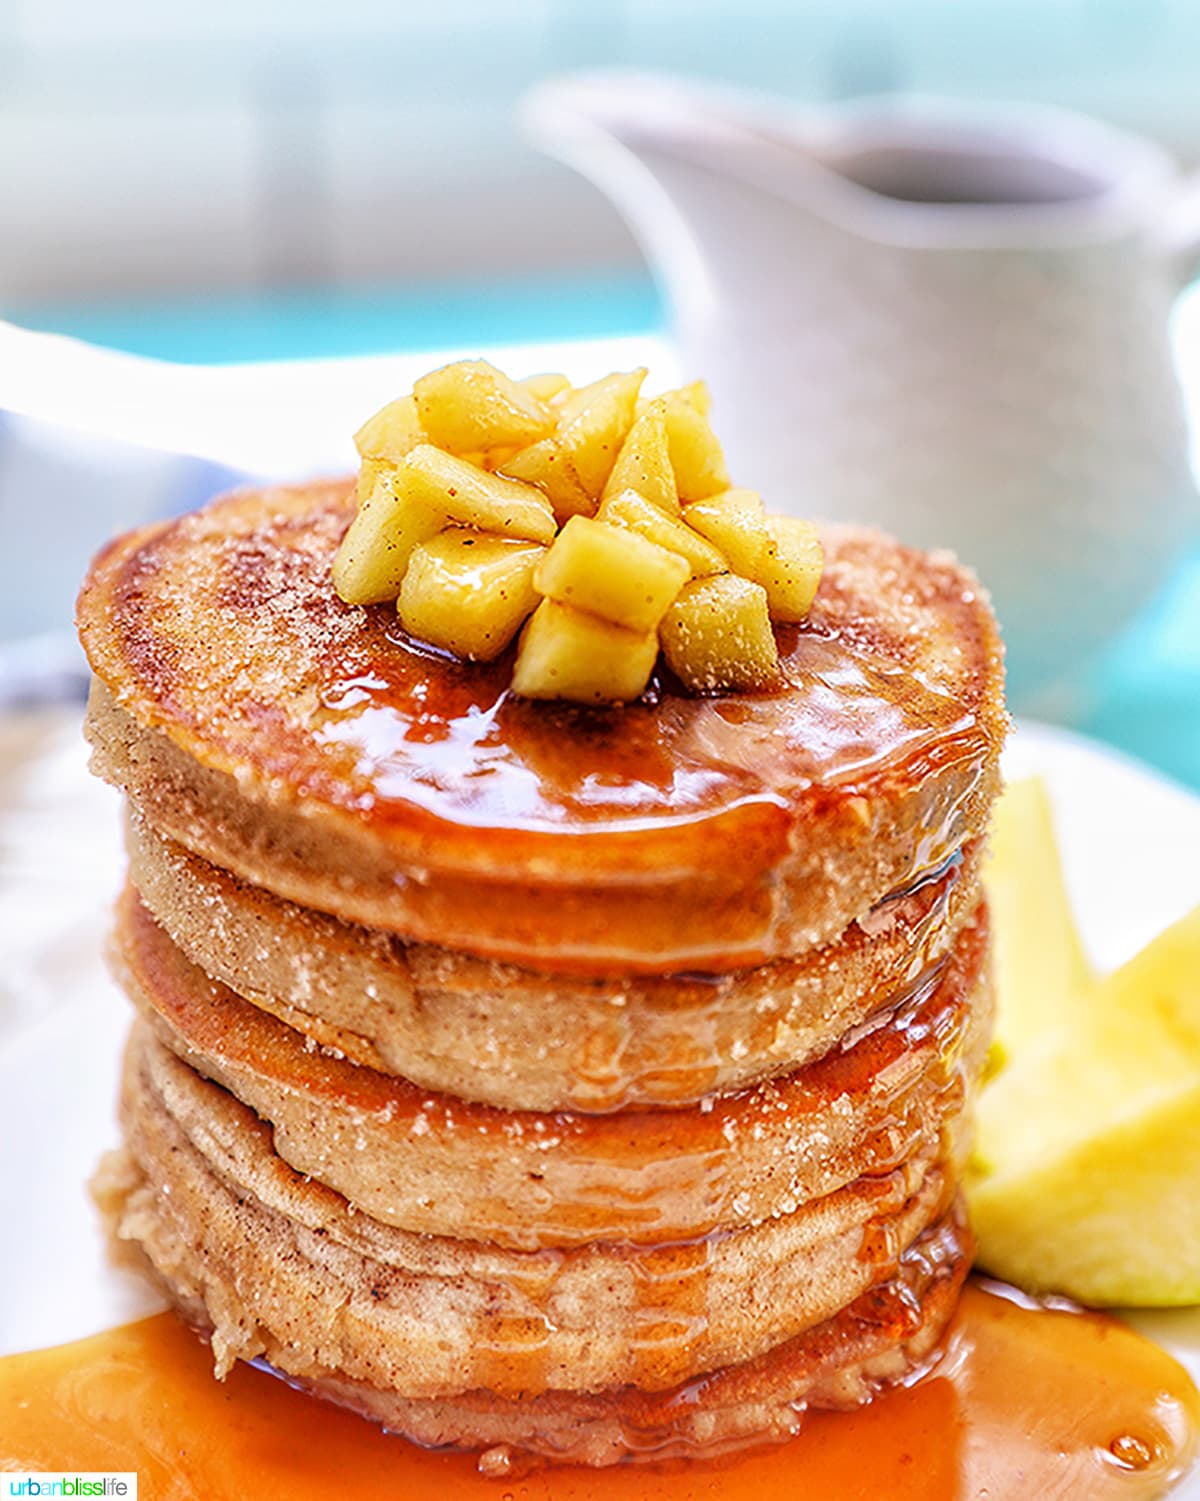 stack of apple cinnamon pancakes with syrup and chopped apples on top, white jar of syrup in the background.